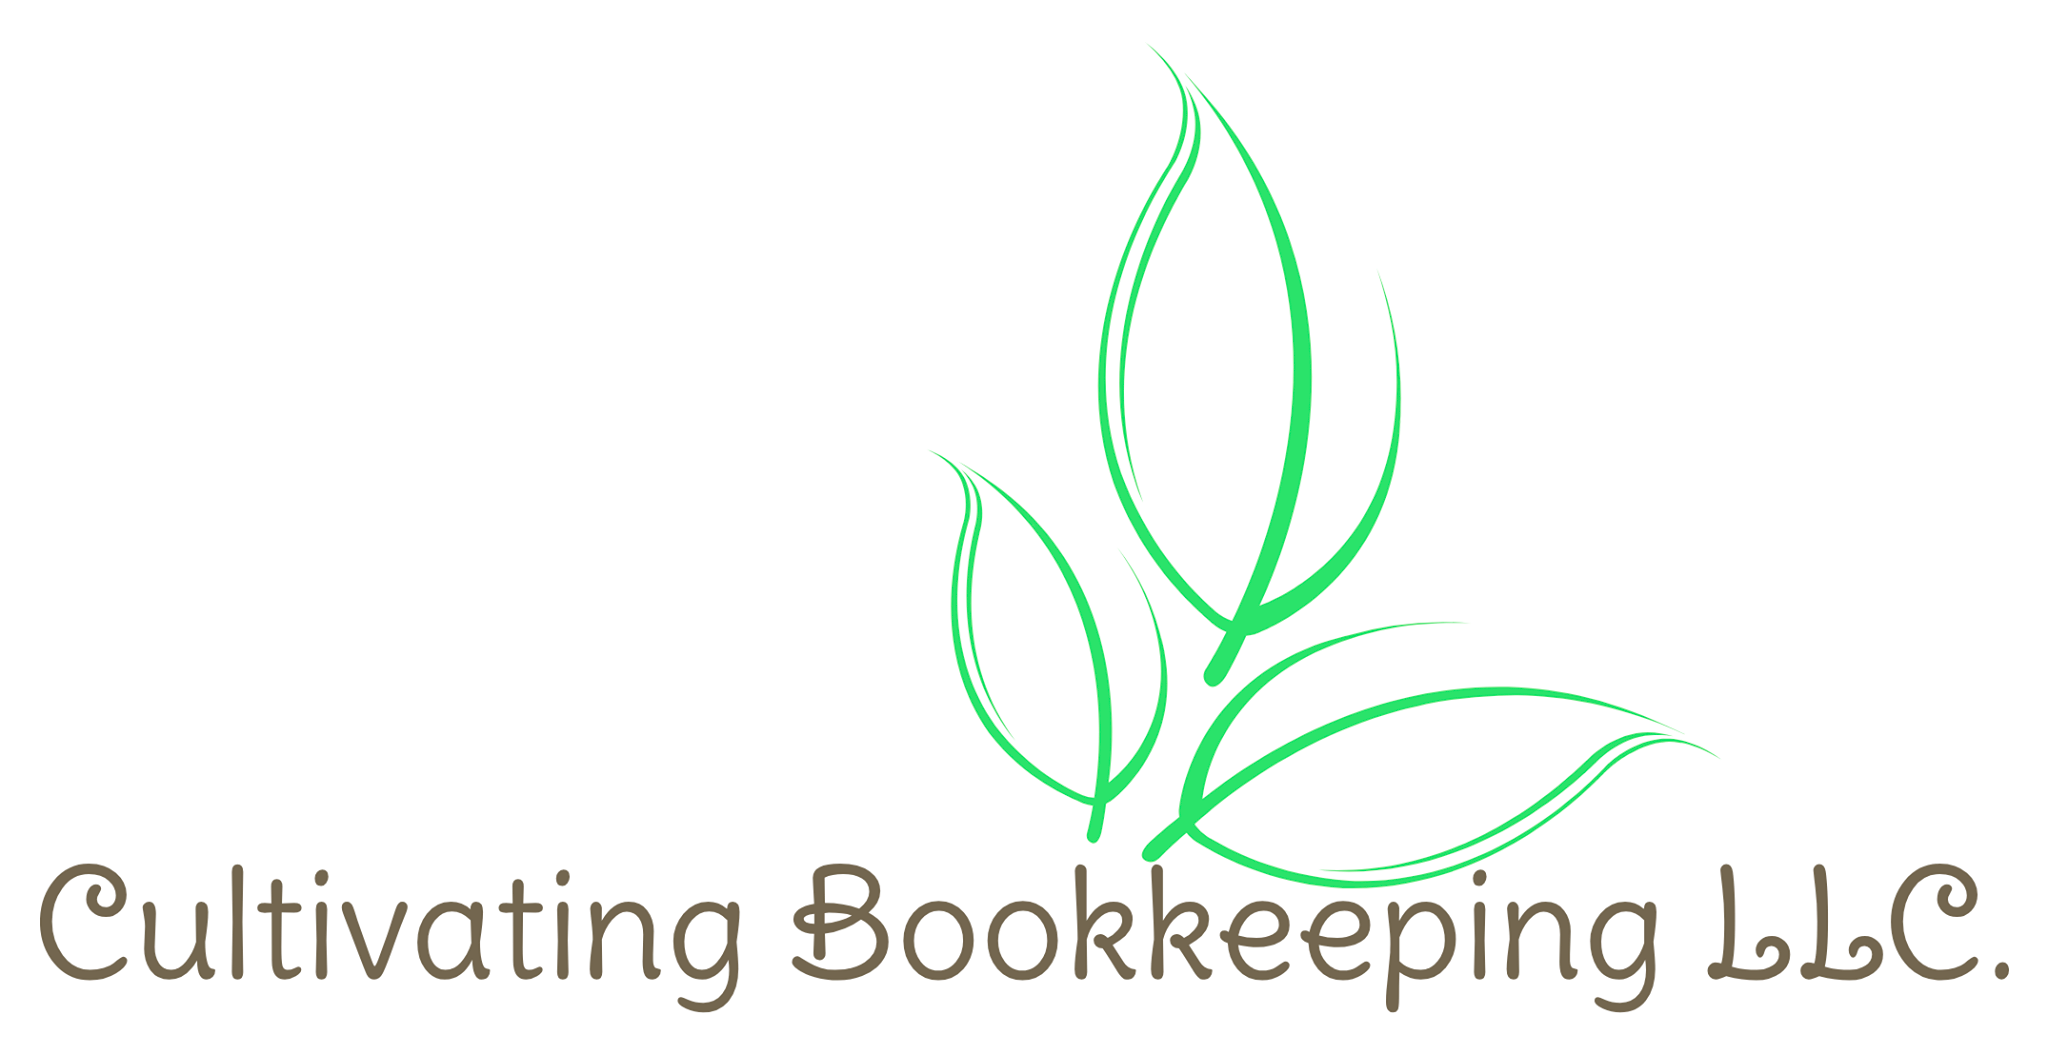 Cultivating Bookkeeping LLC